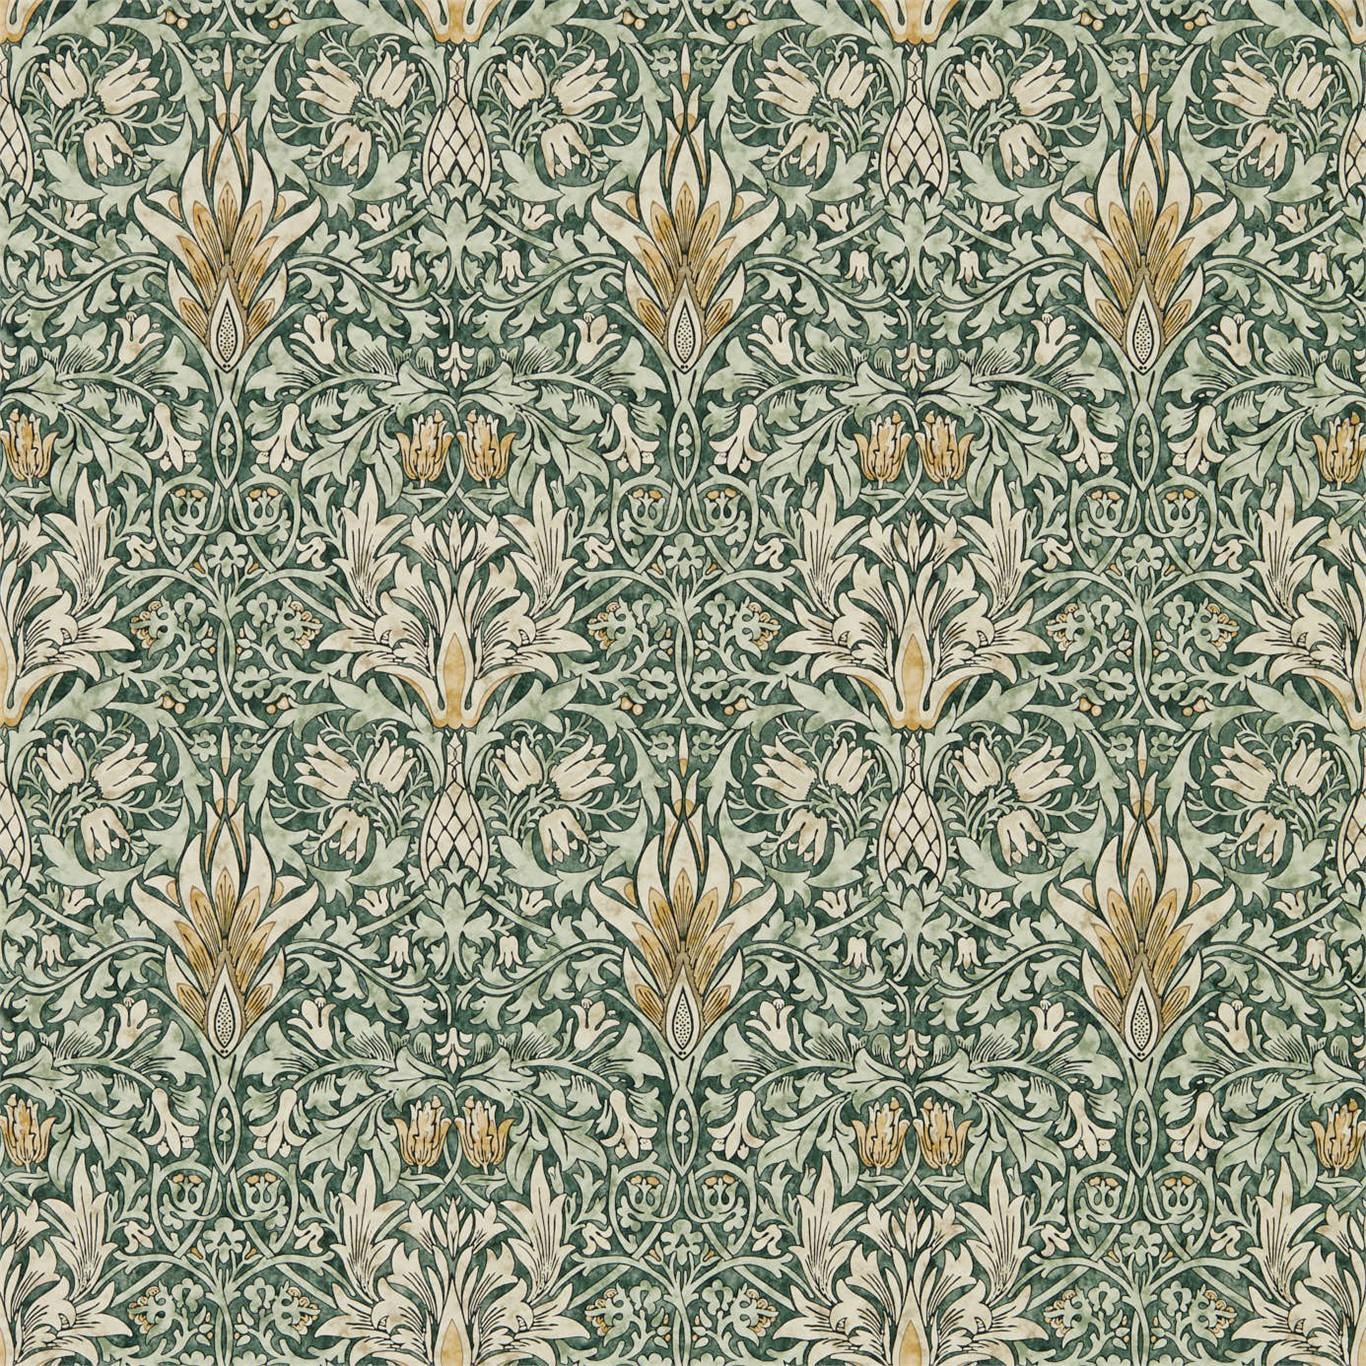 Snakeshead Forest/Thyme Wallpaper DCMW216863 by Morris & Co